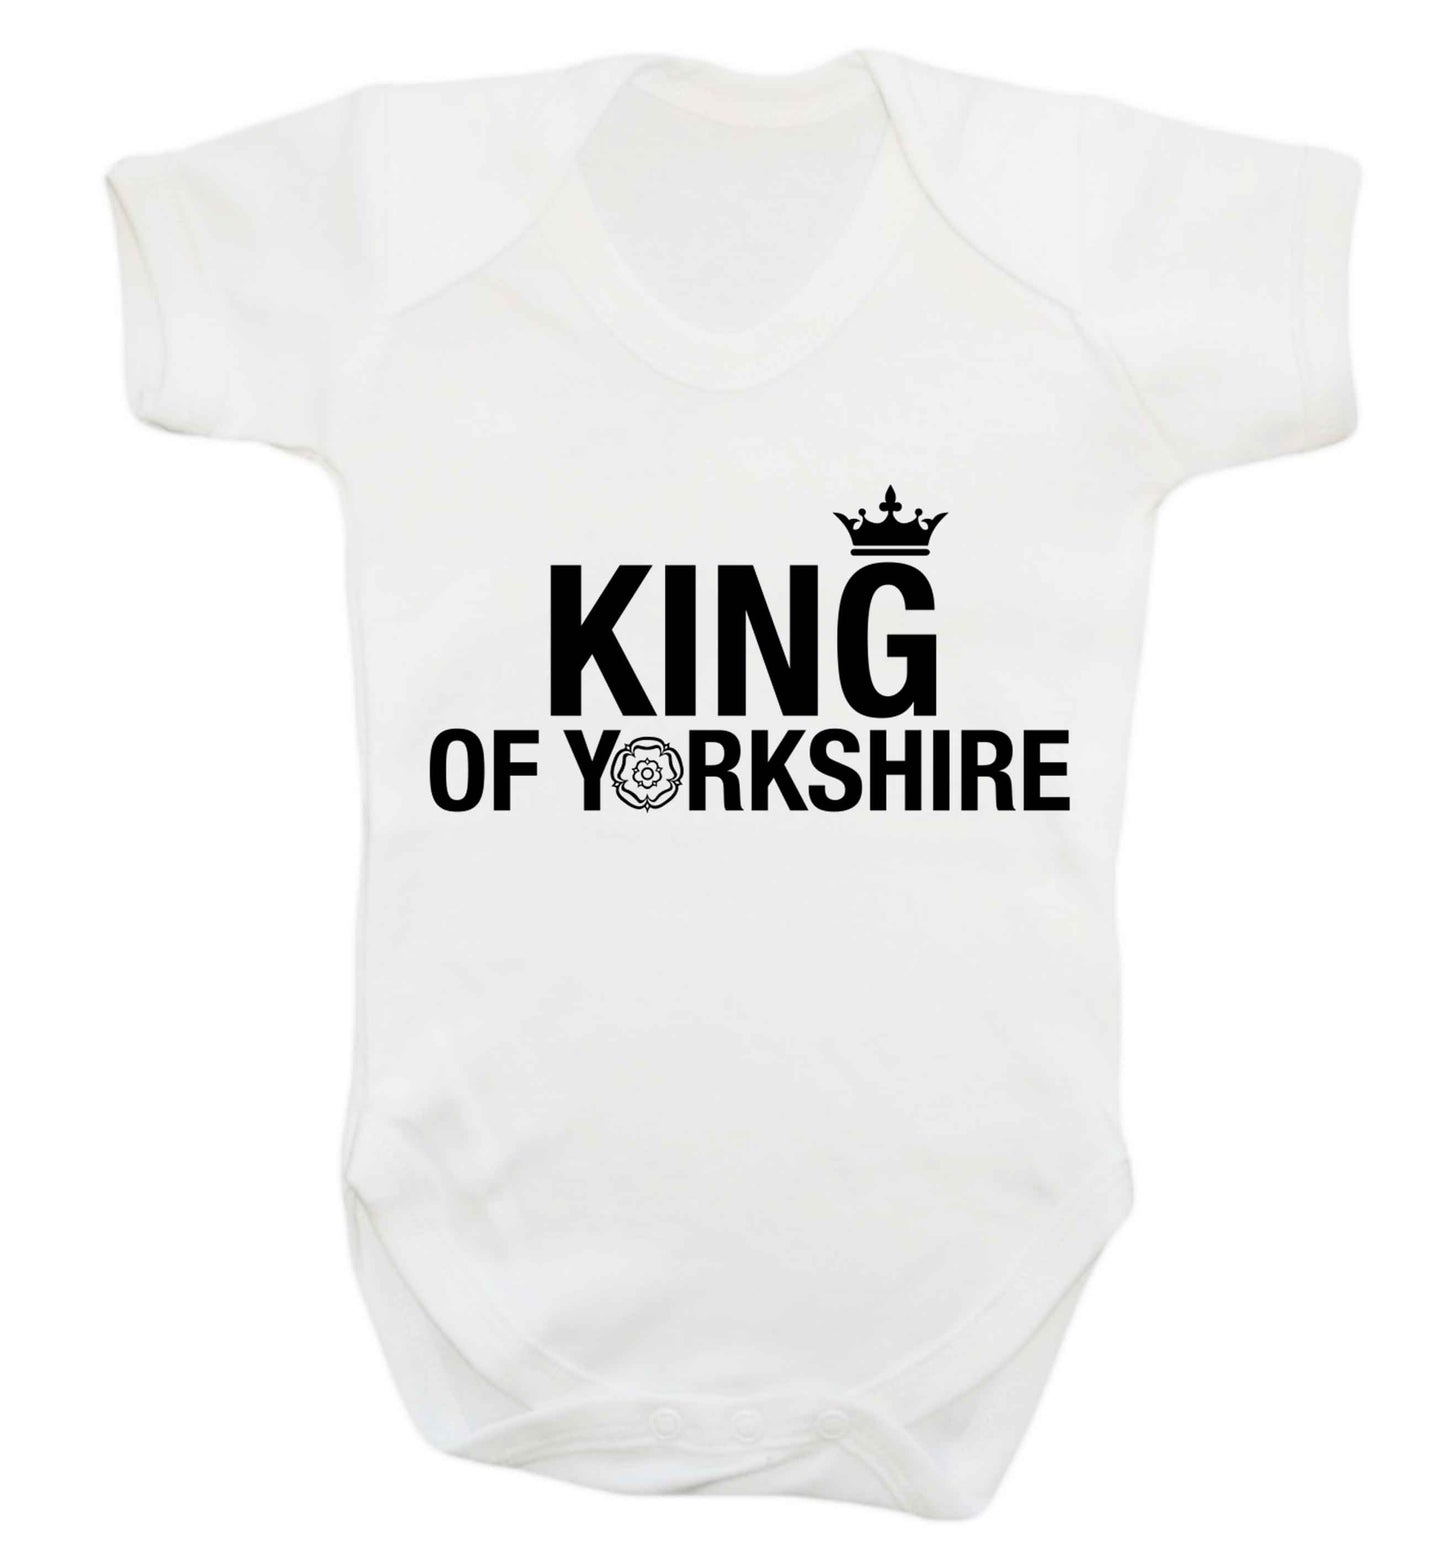 King of Yorkshire Baby Vest white 18-24 months